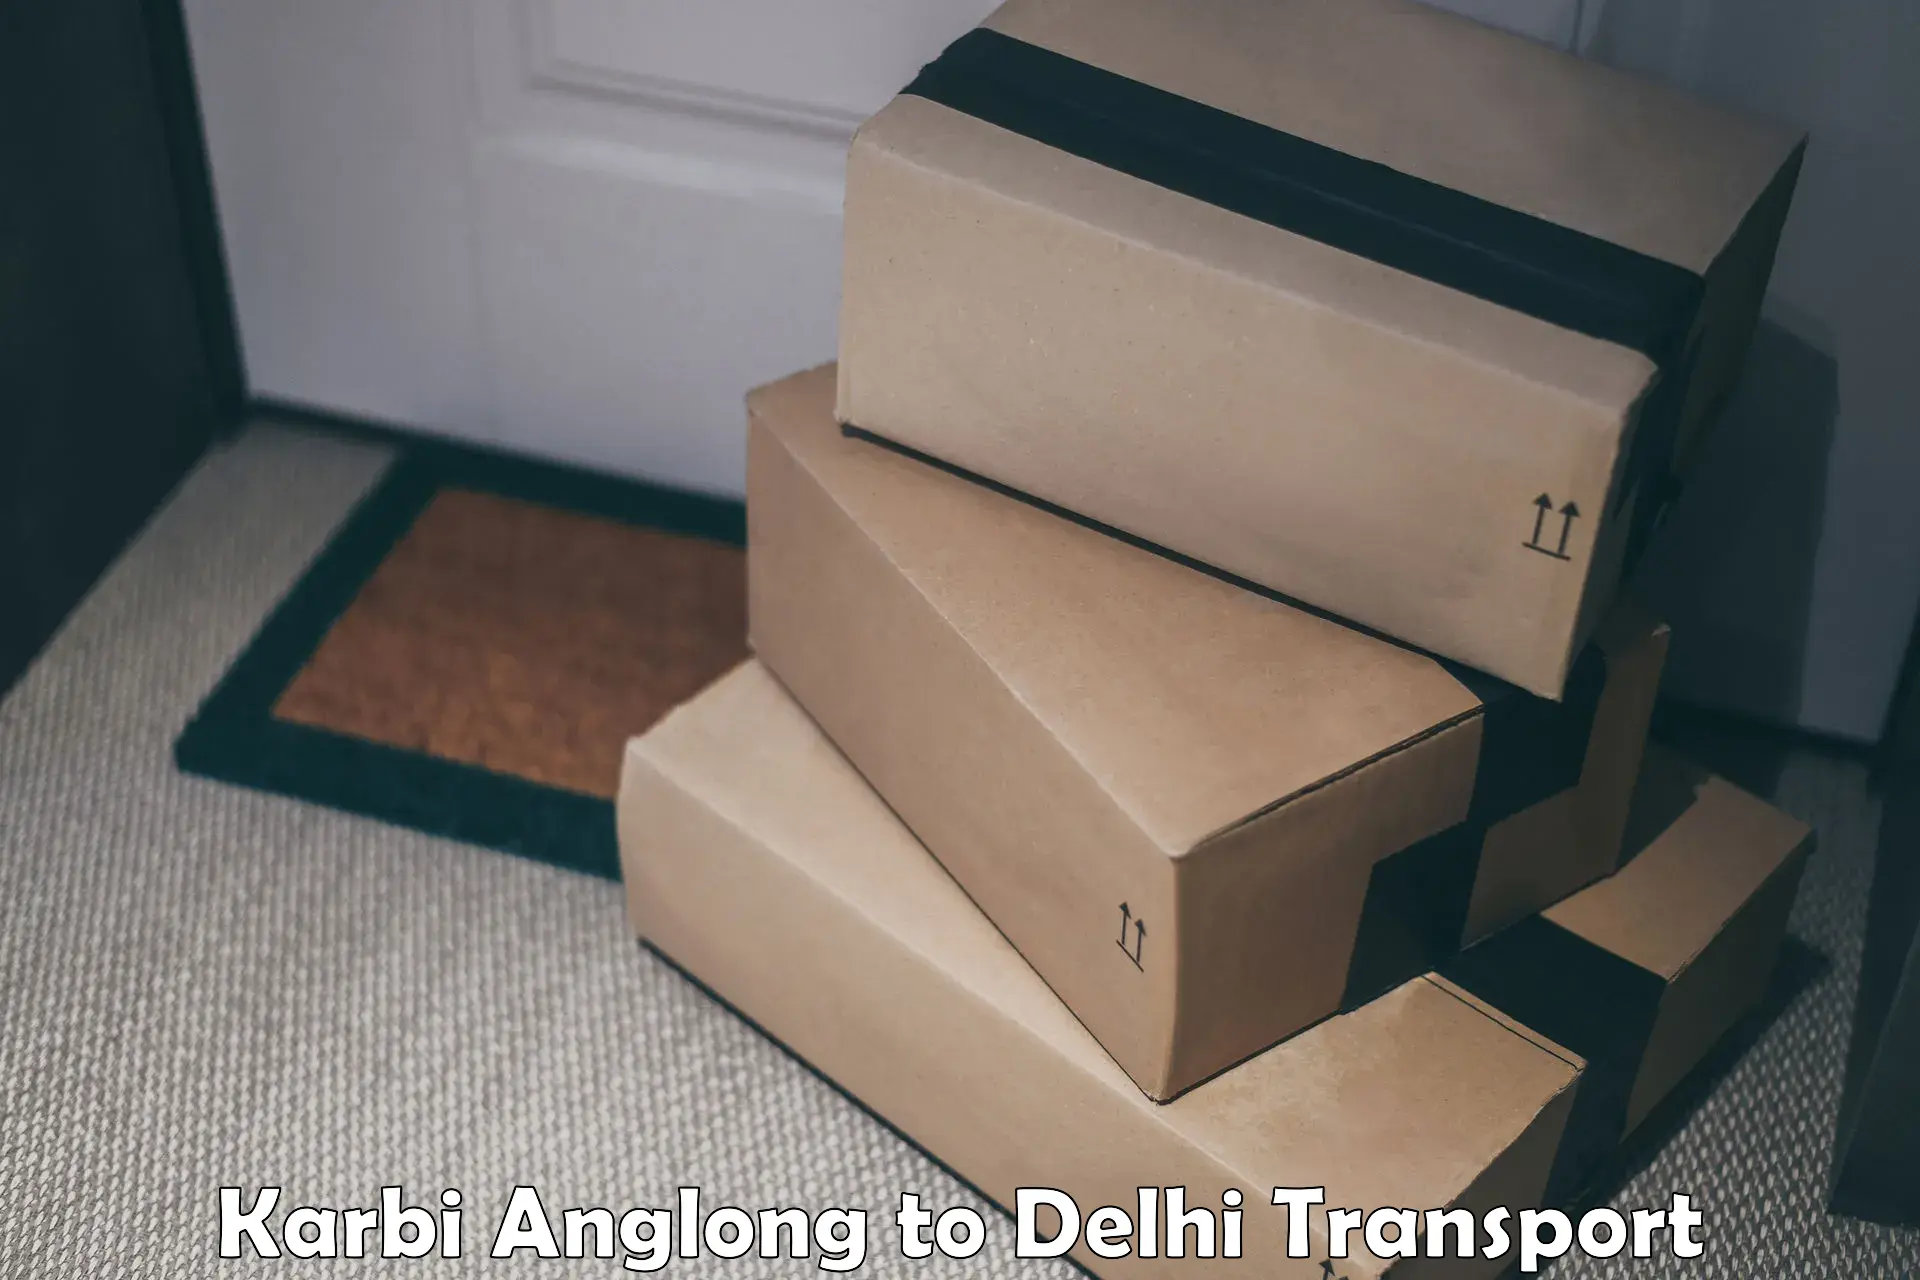 Lorry transport service Karbi Anglong to Delhi